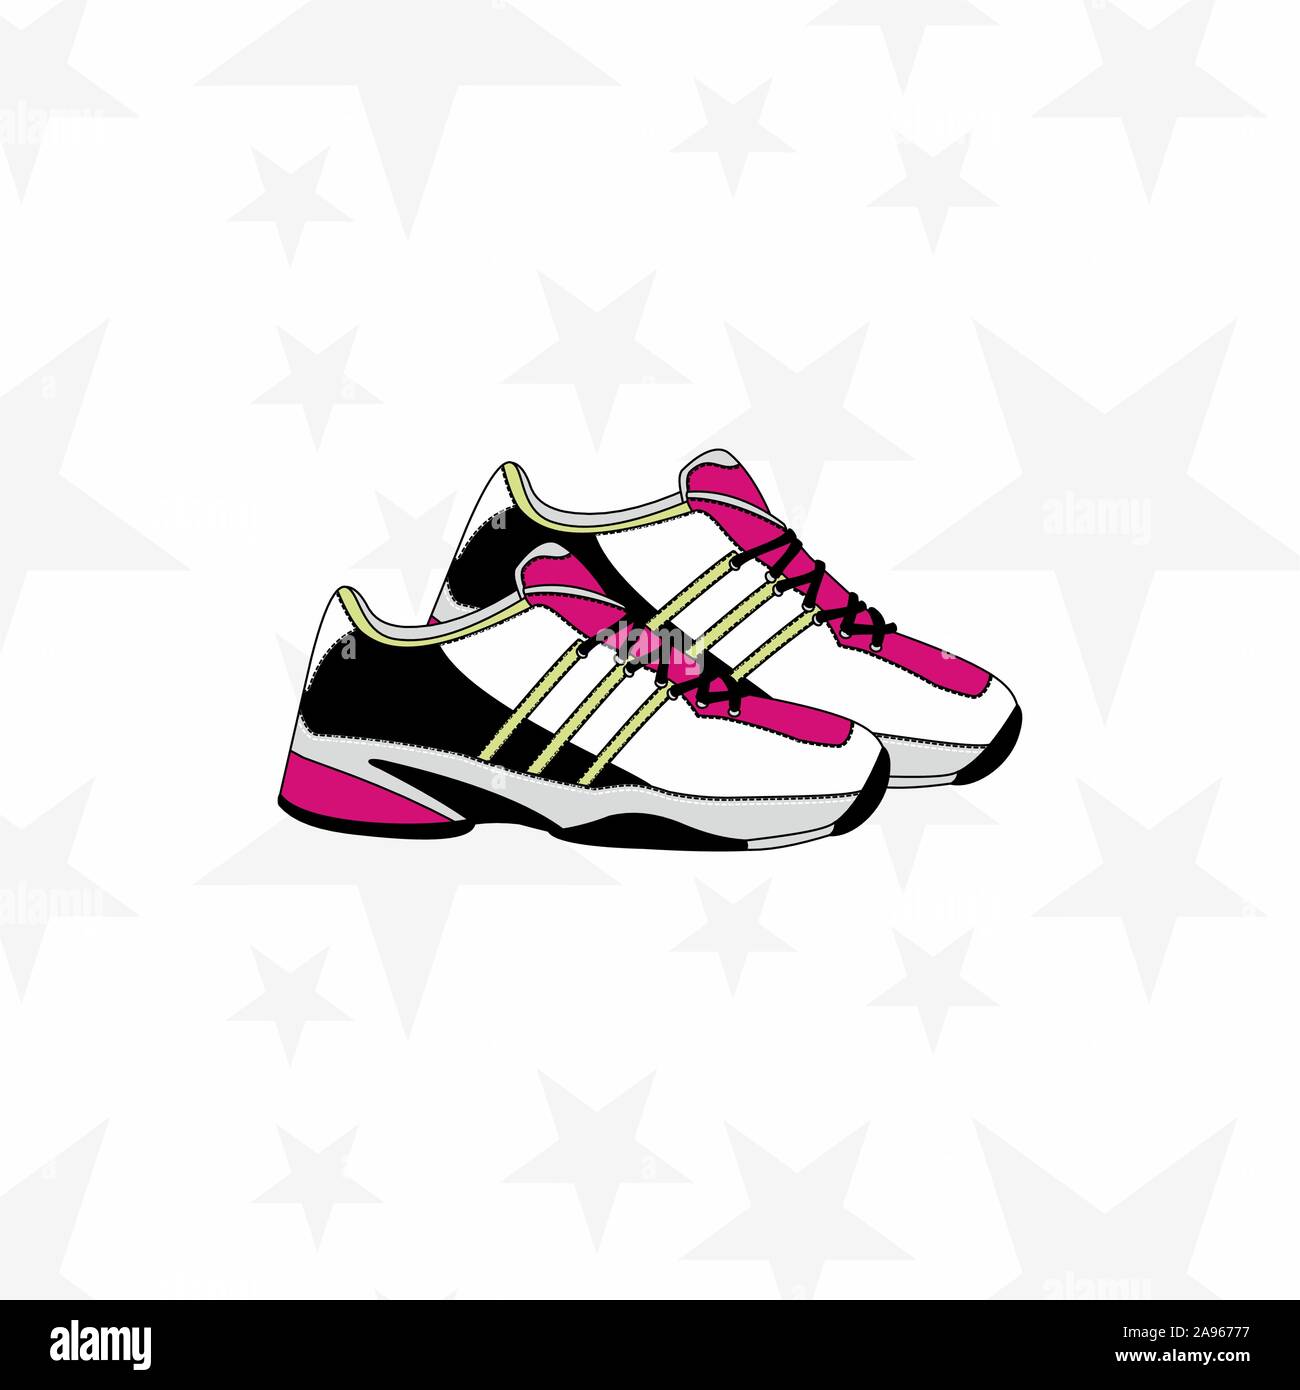 Sneaker for man or woman. trainer, running, casual, gym shoes. Sports ...